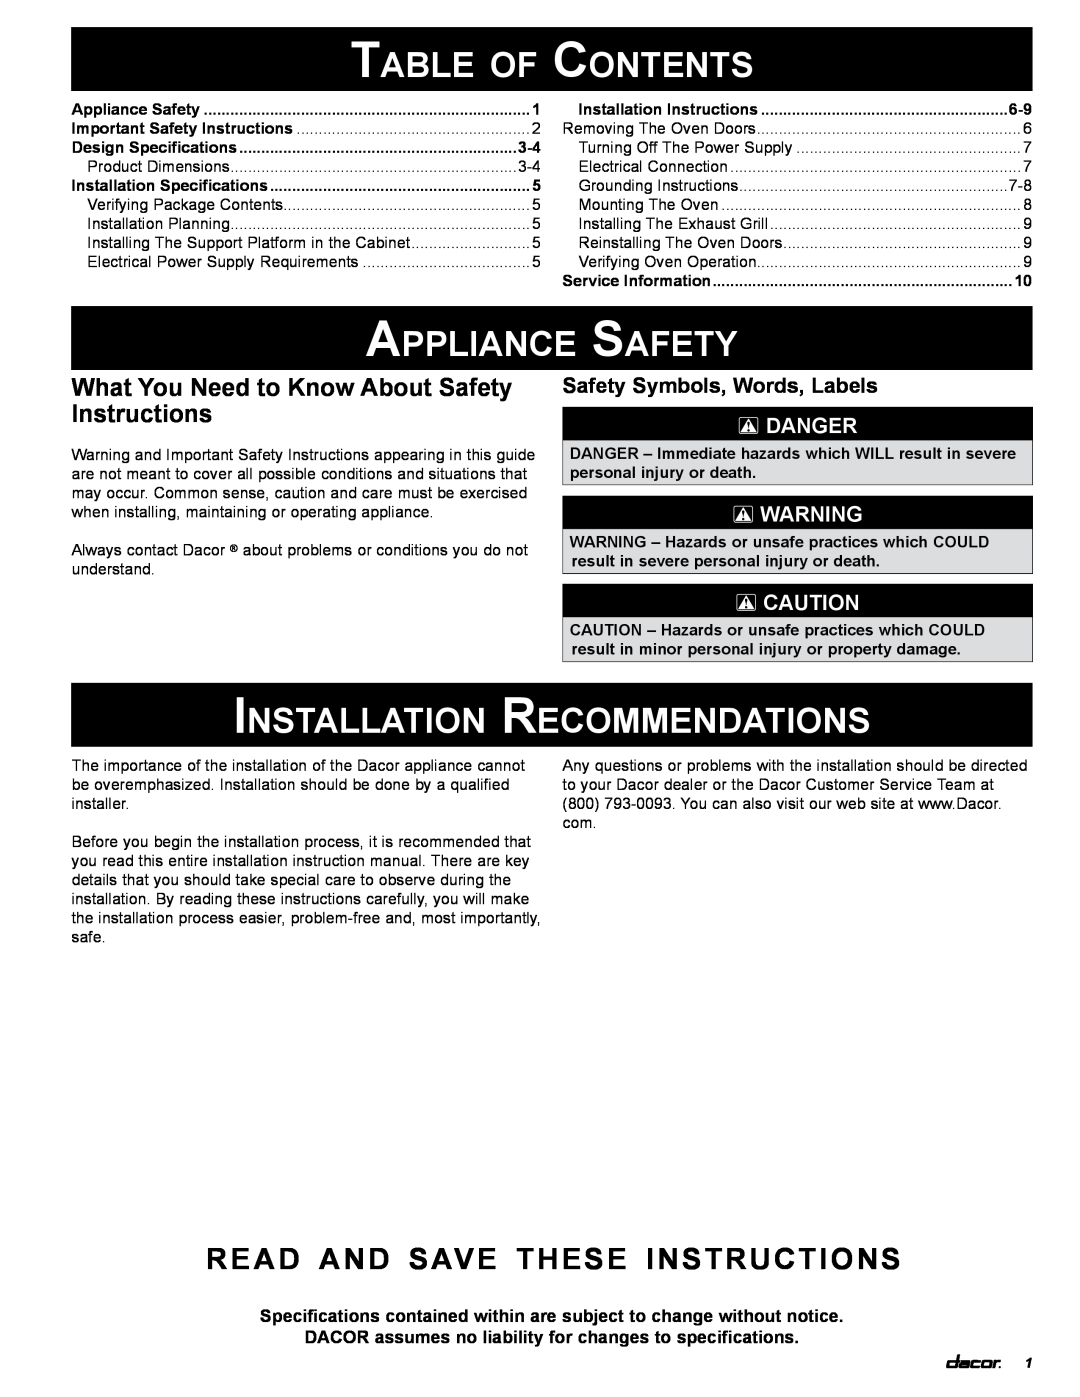 Dacor ECD230 Table of Contents, Appliance Safety, Installation Recommendations, Danger, read and save these instructions 